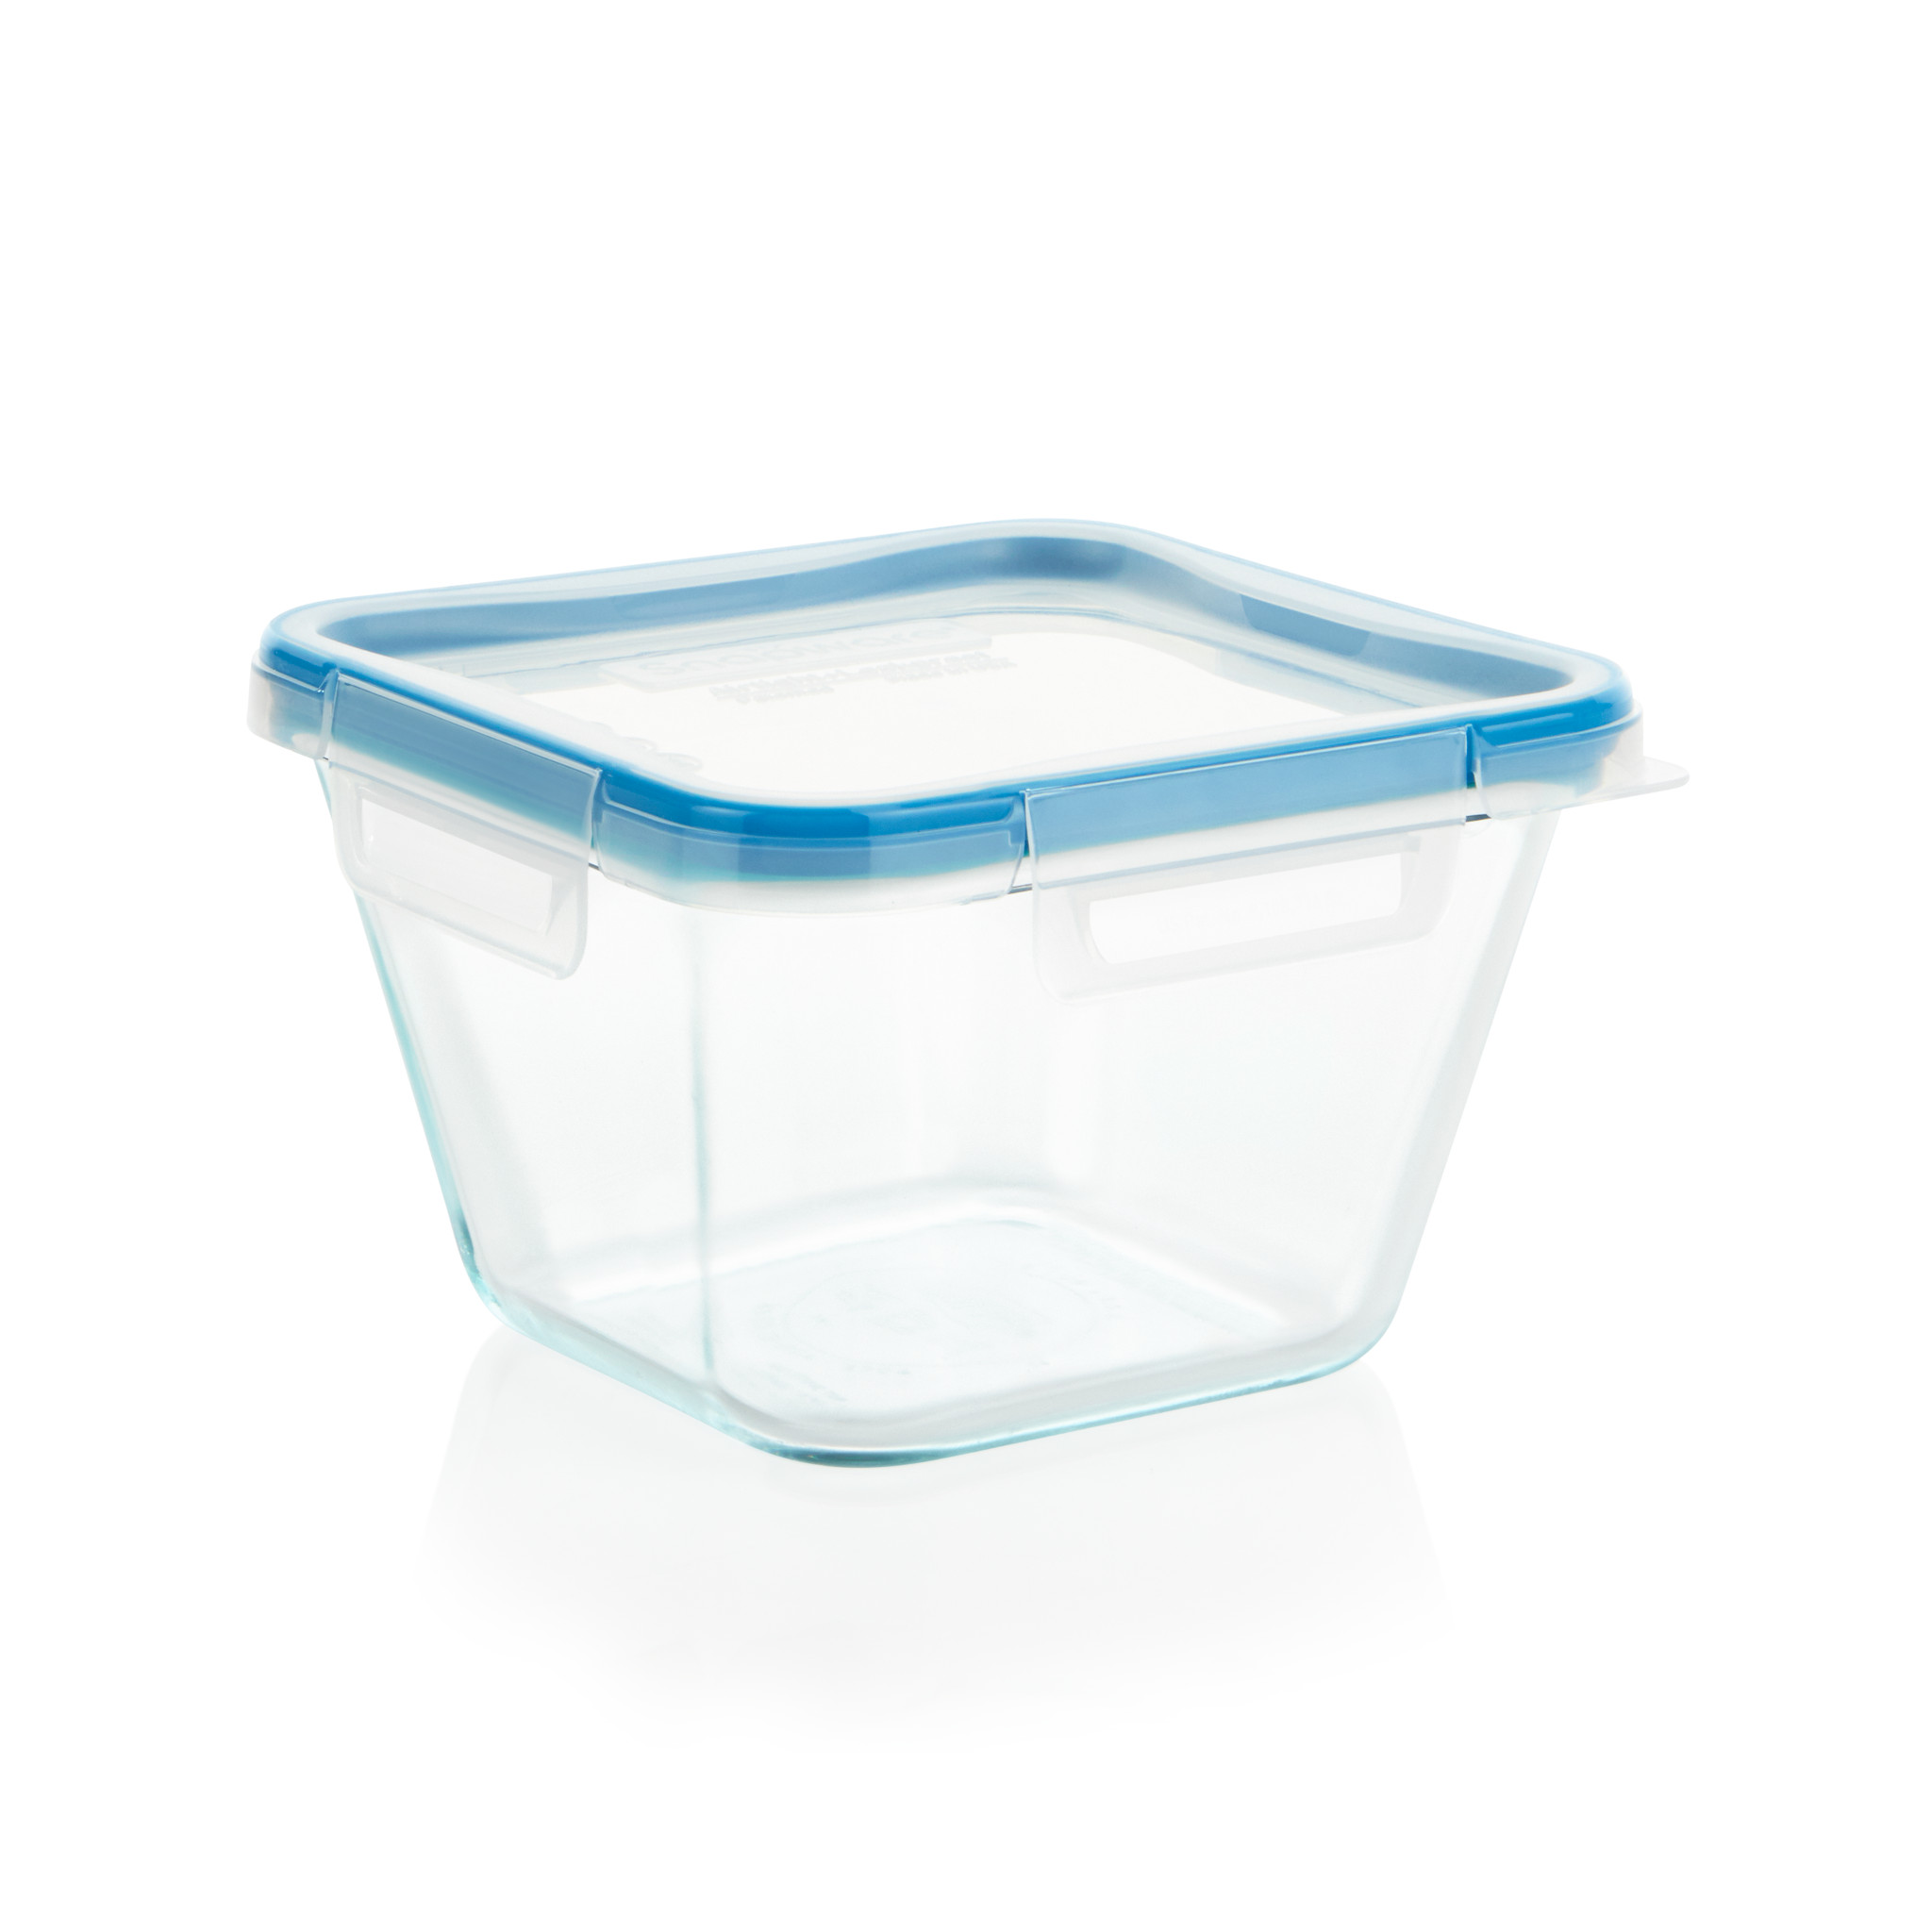 https://embed.widencdn.net/img/worldkitchen/25bie9bybd/2048px/1126624_SN_Storage_Silo_Square_Total-Solution-Glass_6.5cup-Square-Saltwater-Blue-Lid_1.png